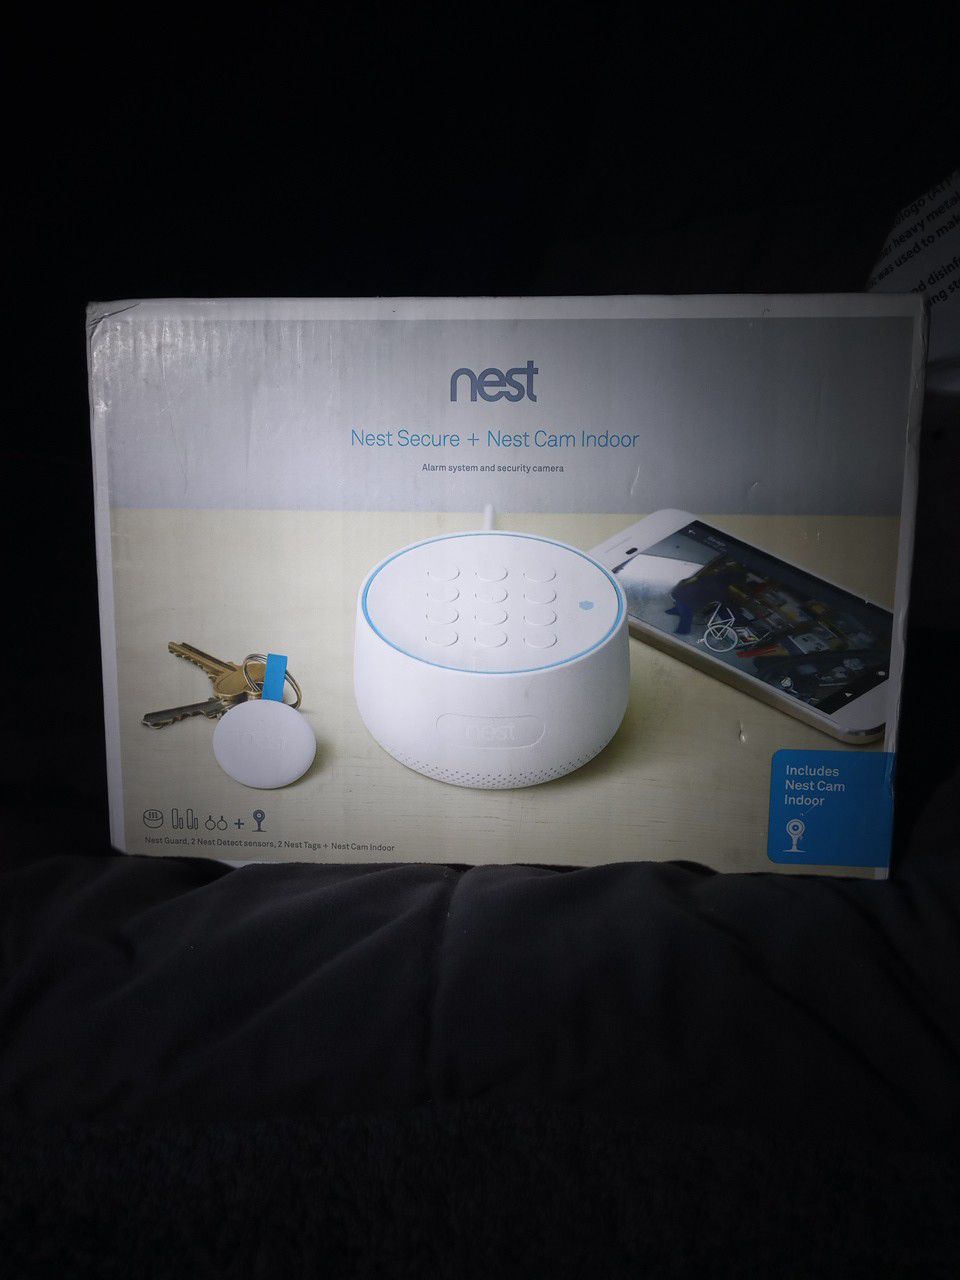 Nest Alarm System and Security Camera